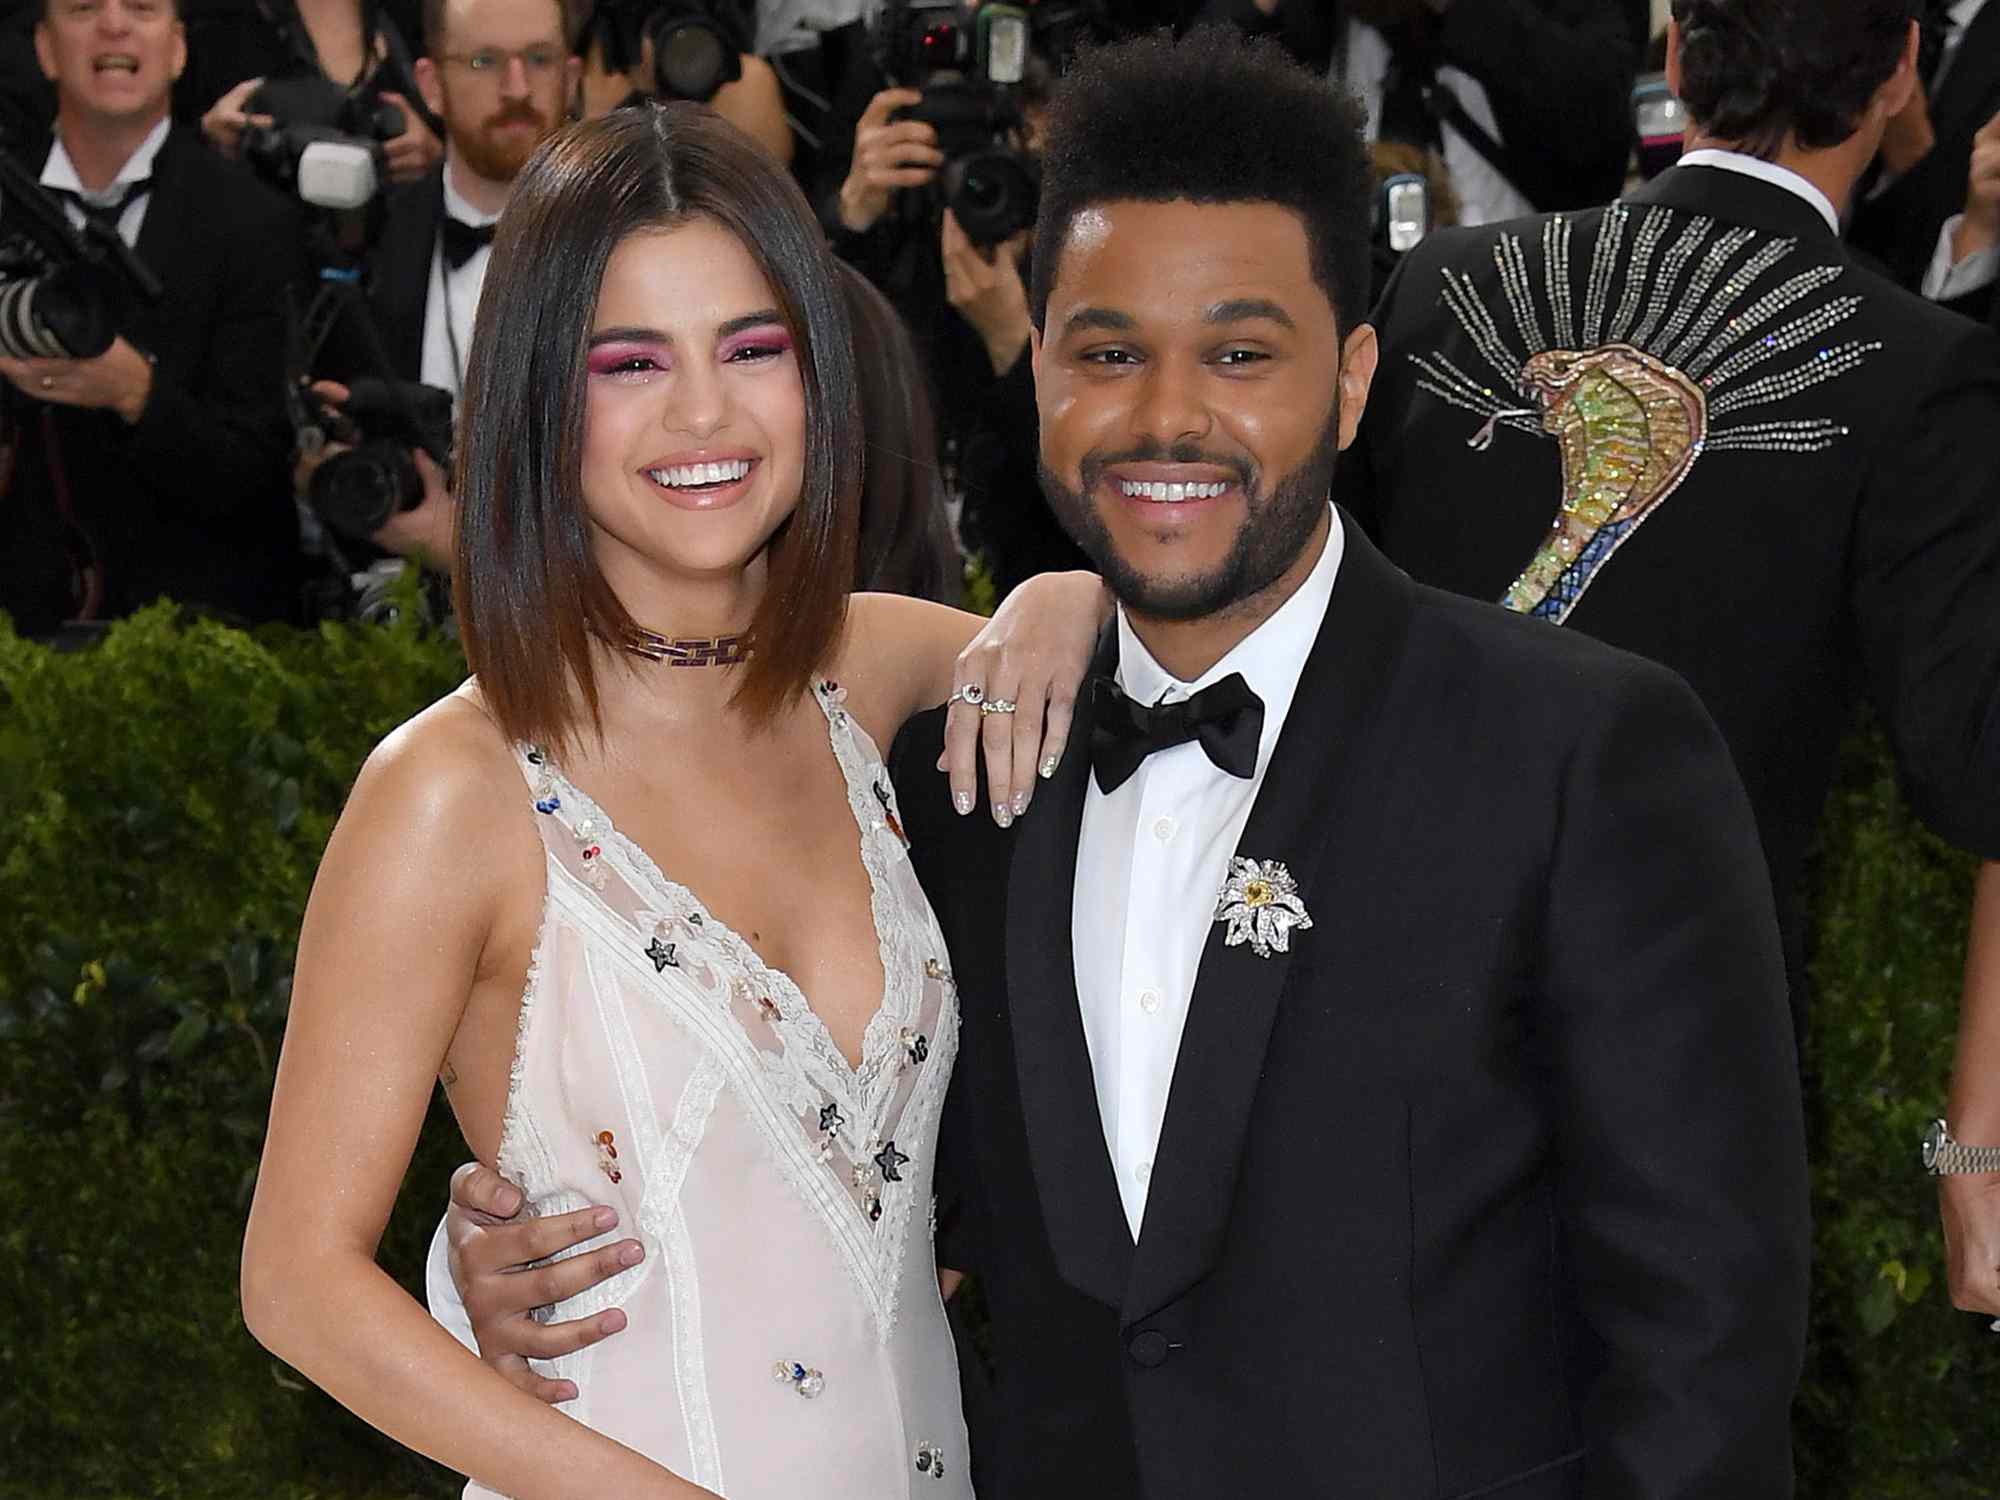 Selena Gomez and The Weeknd attend the "Rei Kawakubo/Comme des Garcons: Art Of The In-Between" Costume Institute Gala at the Metropolitan Museum of Art on May 1, 2017 in New York City